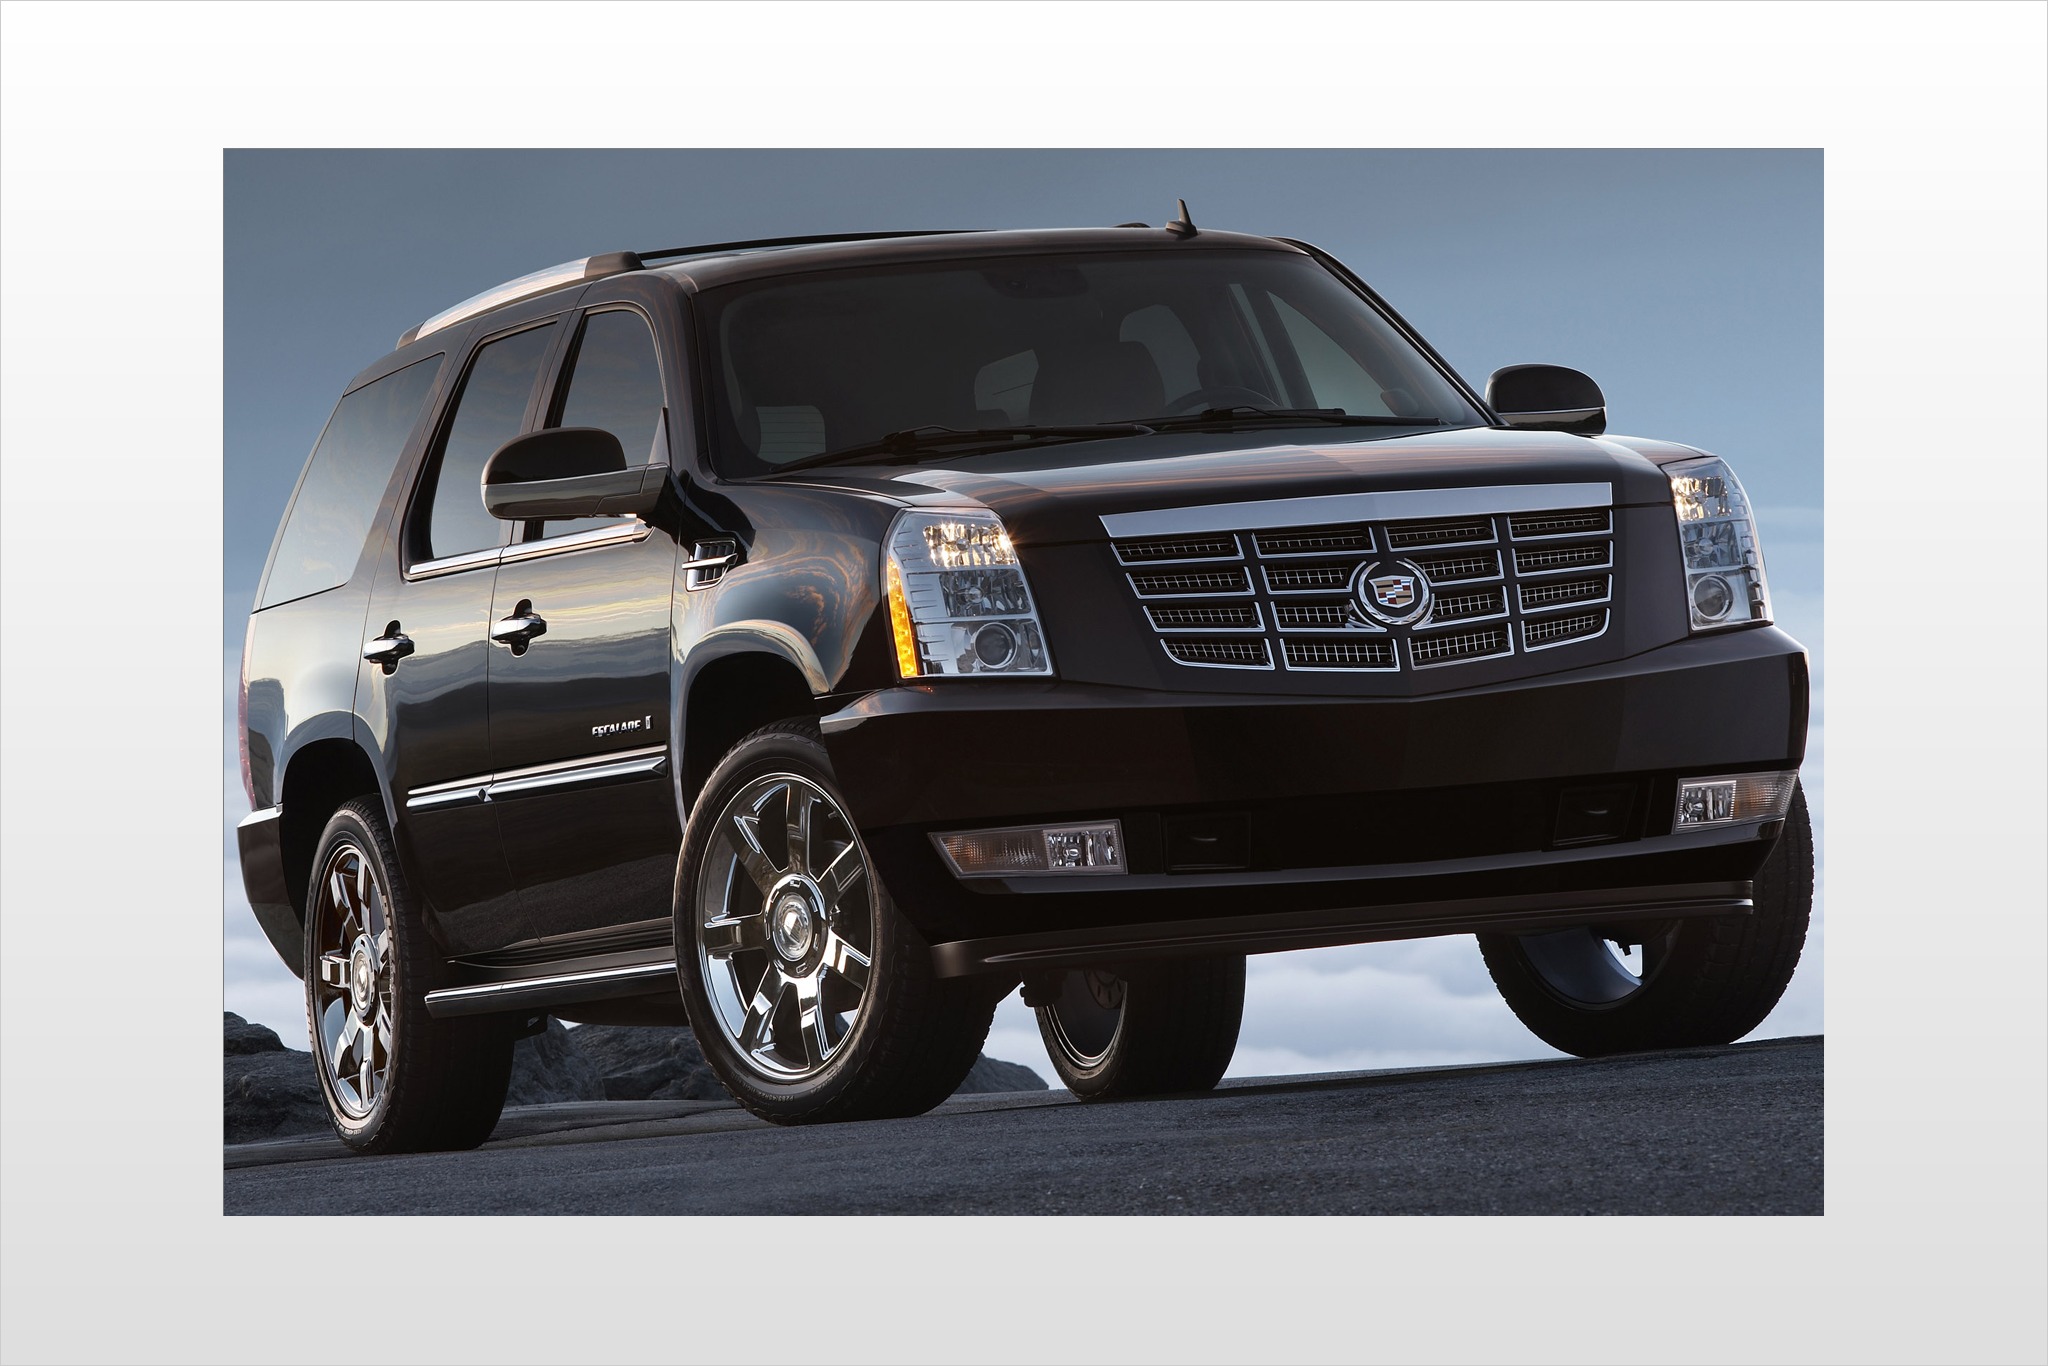 2008 Cadillac Escalade 2WD VIN Number Search - AutoDetective